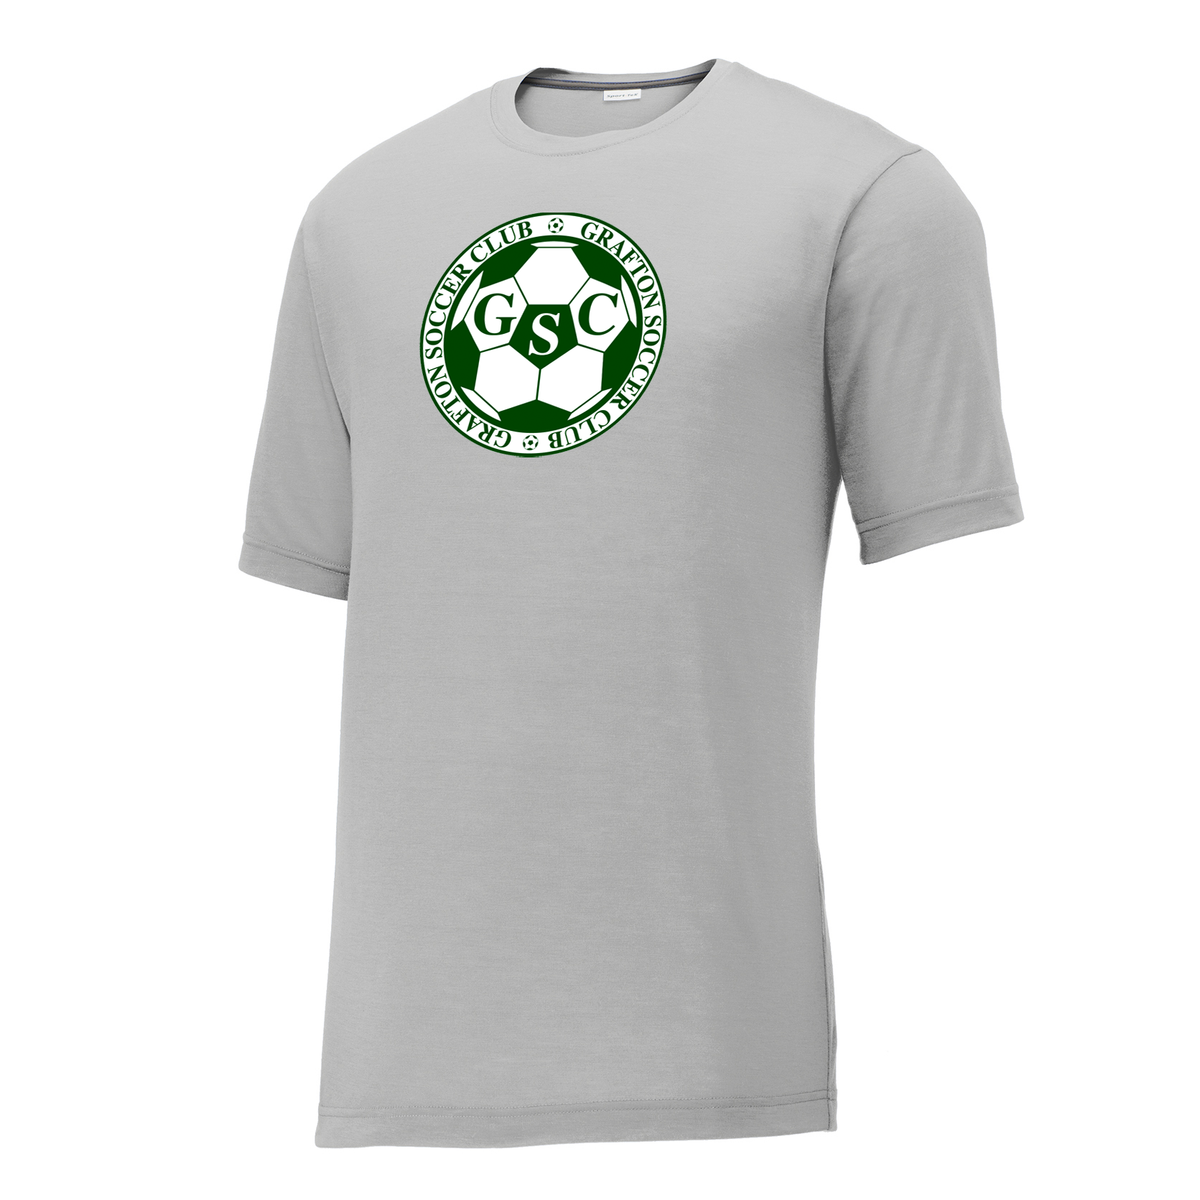 Grafton Youth Soccer Club CottonTouch Performance T-Shirt